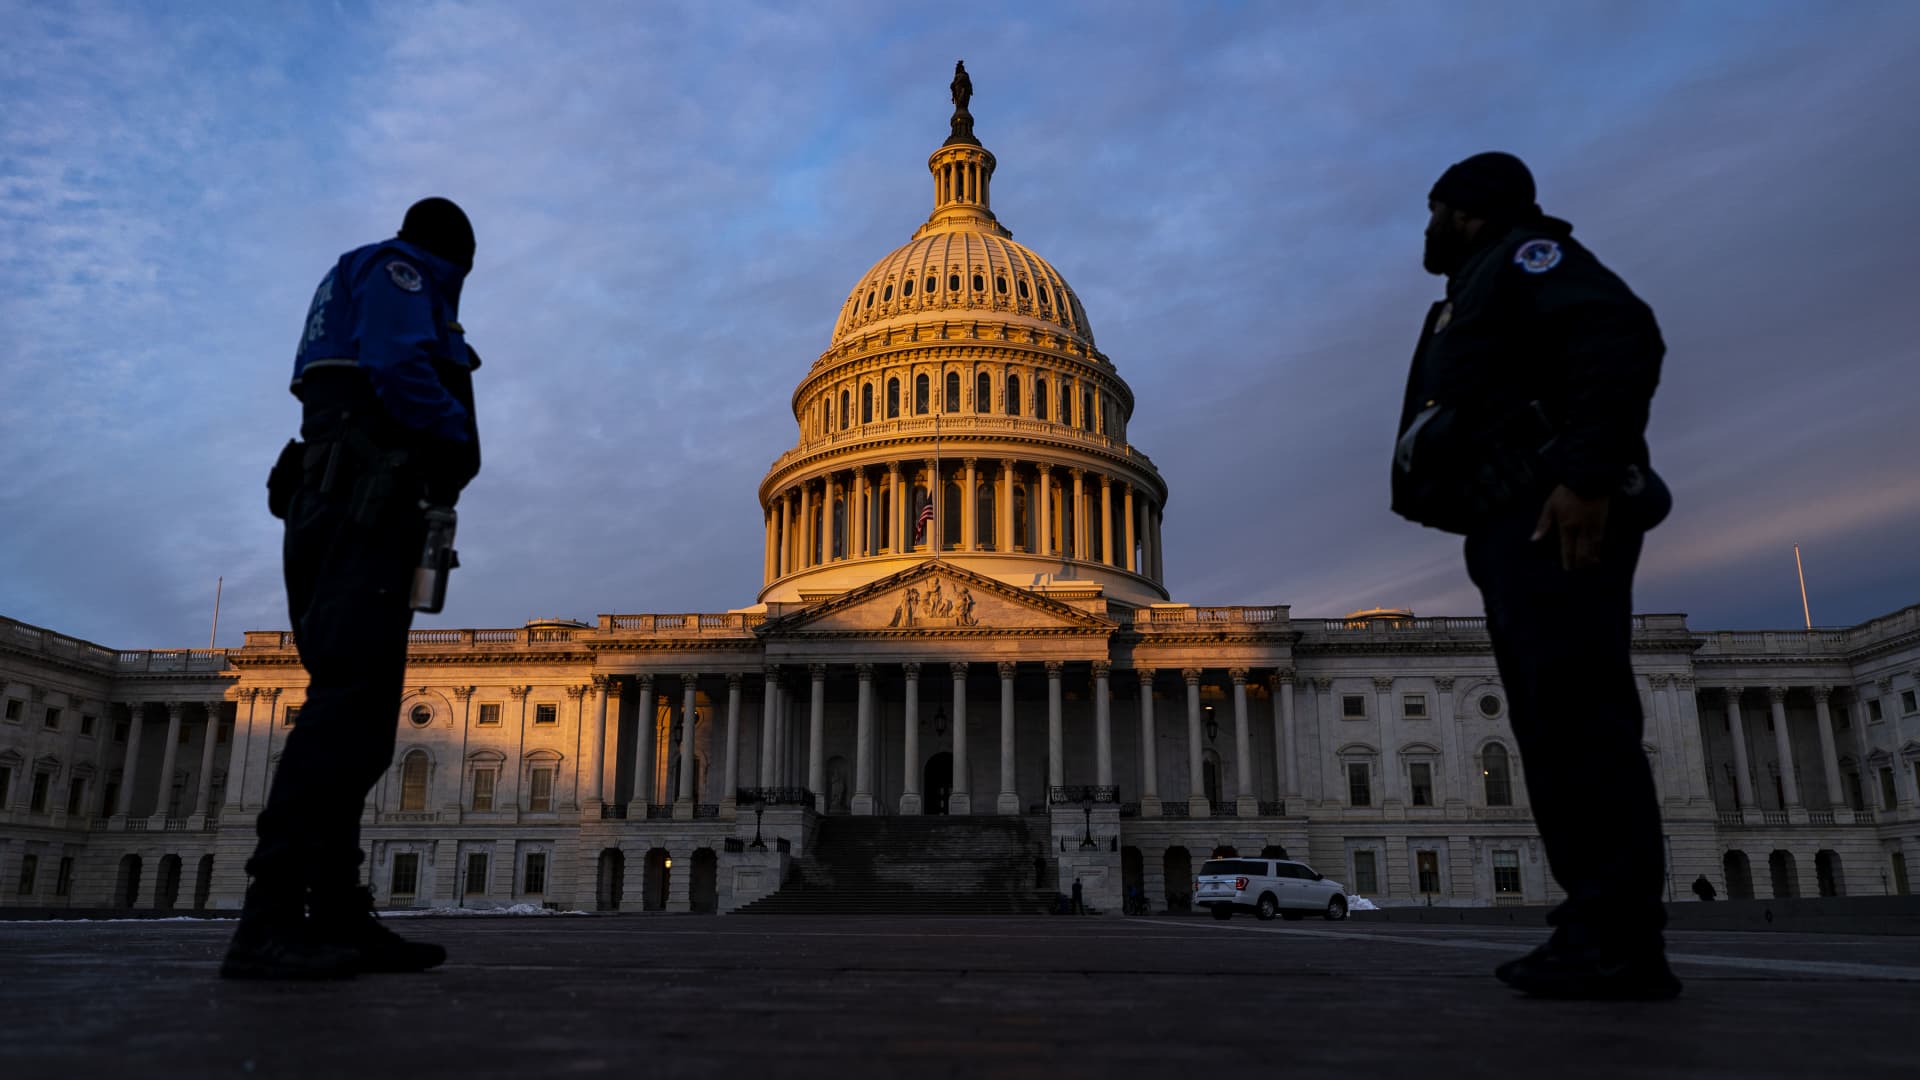 Capitol Police Officers stand on the East Plaza of the Capitol Campus as the dome of the U.S. Capitol Building is illuminated by the rising sun on Capitol Hill on Thursday, Jan. 6, 2022 in Washington, DC.